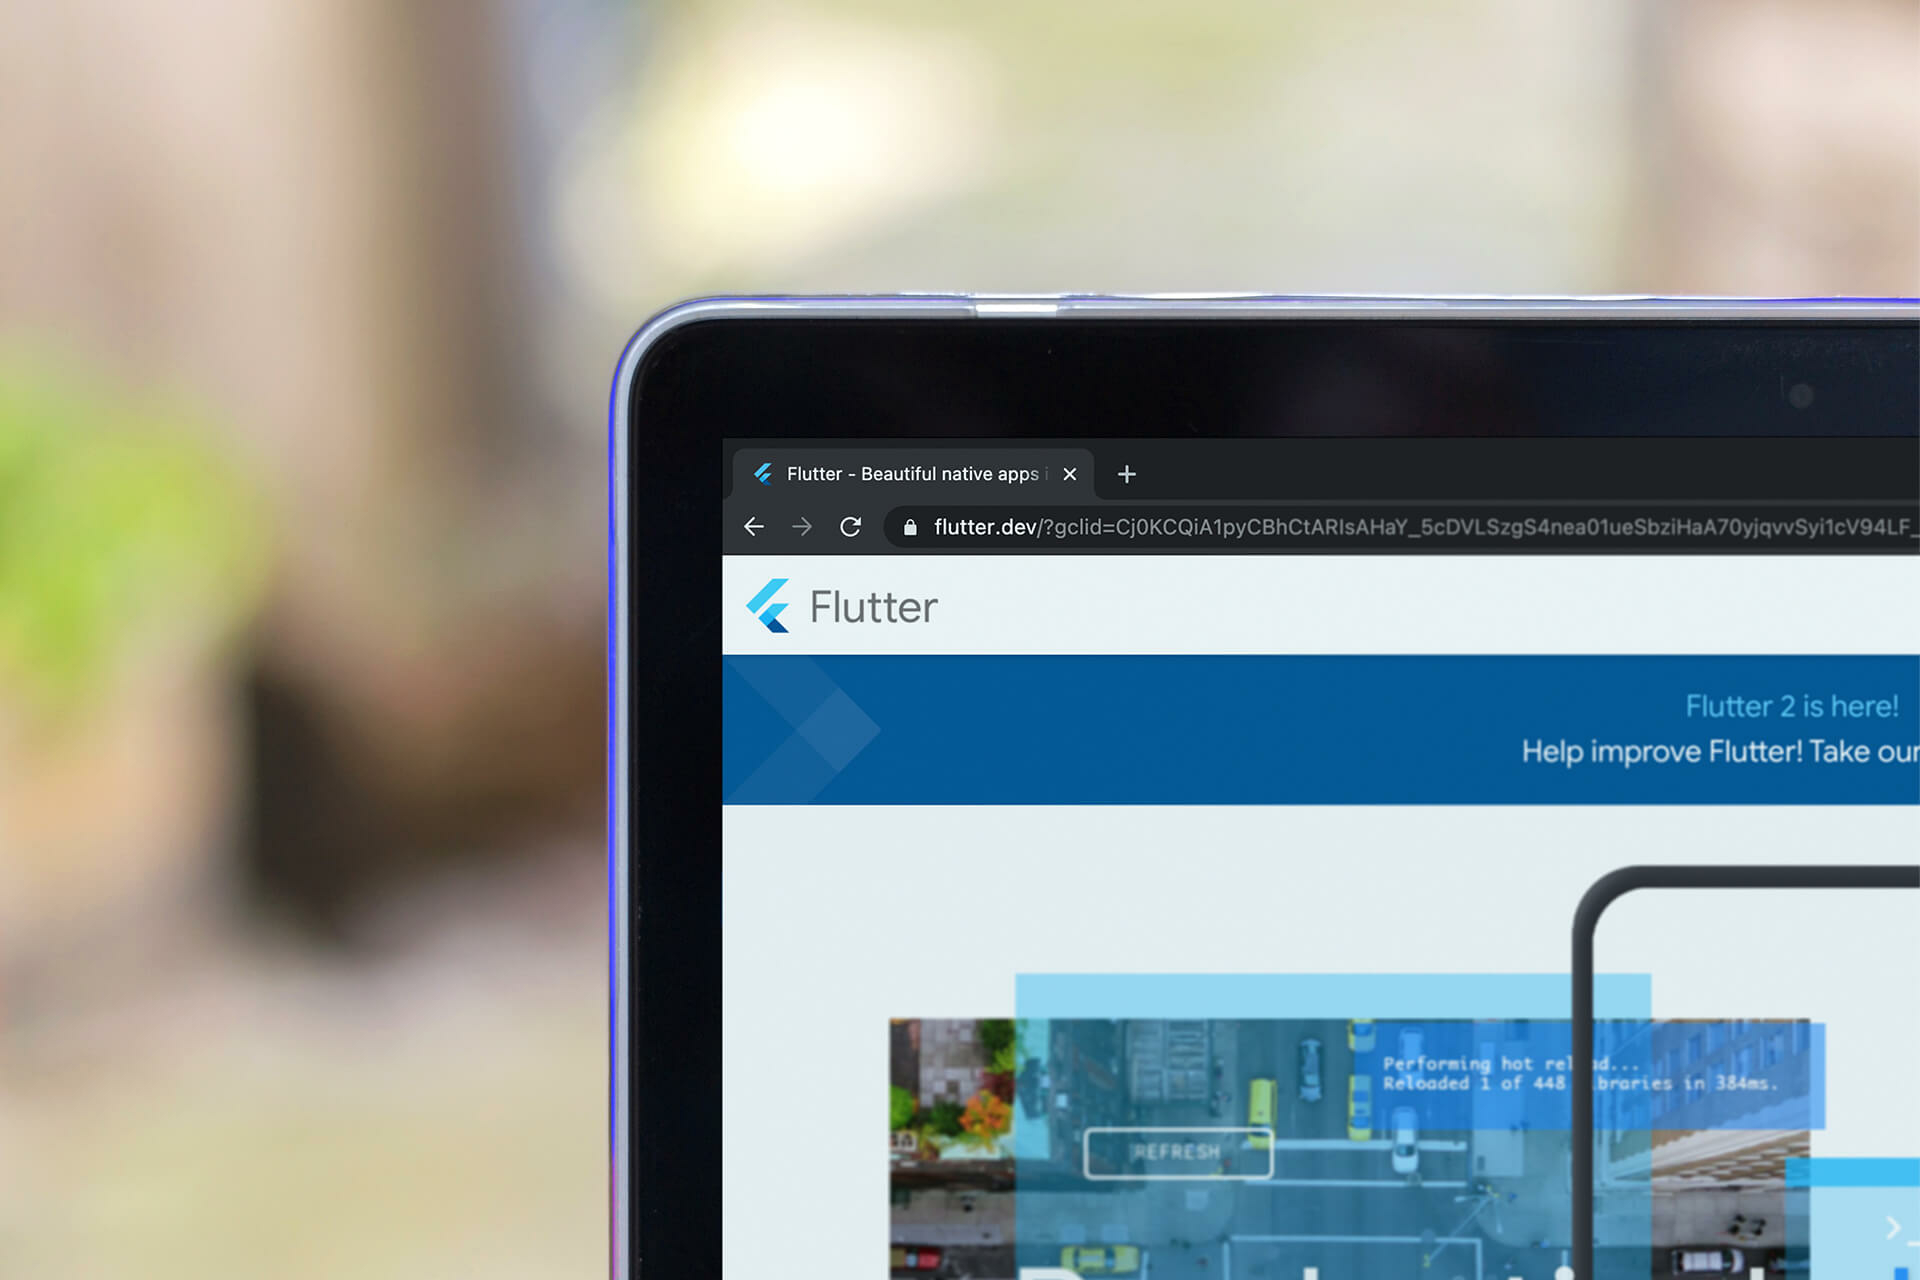 What’s new in Flutter 2: The Hottest Updates